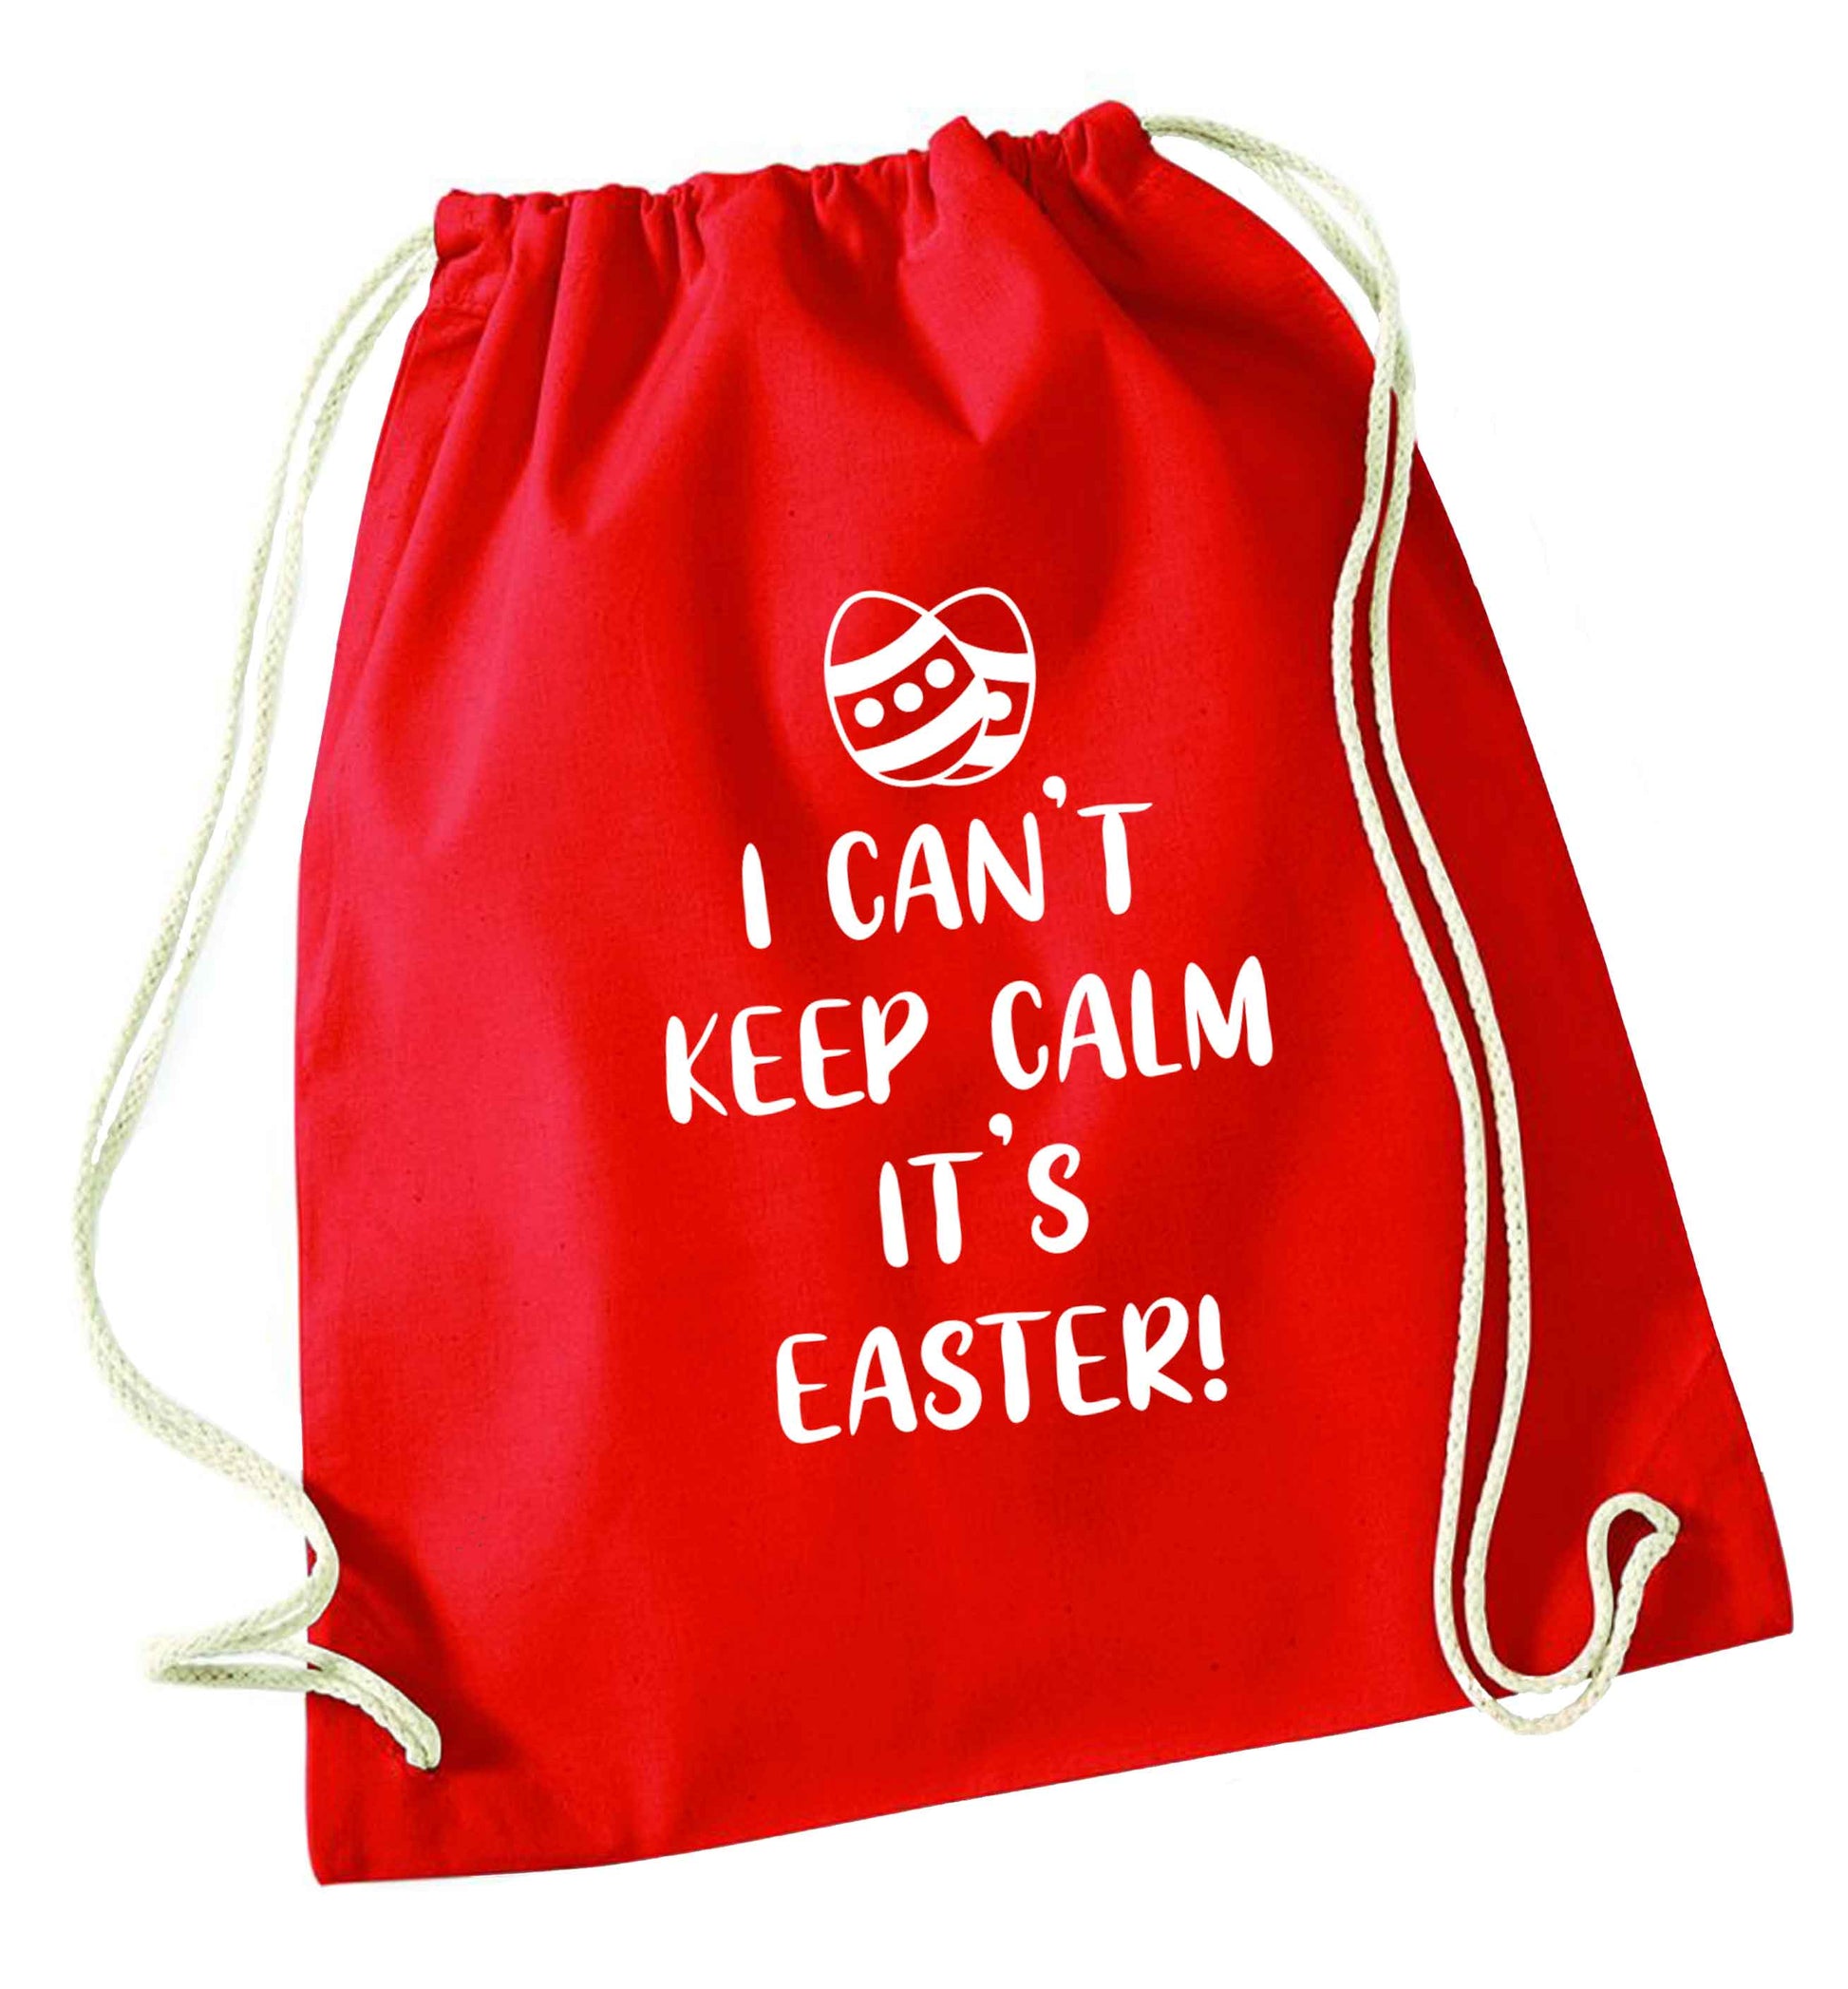 I can't keep calm it's Easter red drawstring bag 